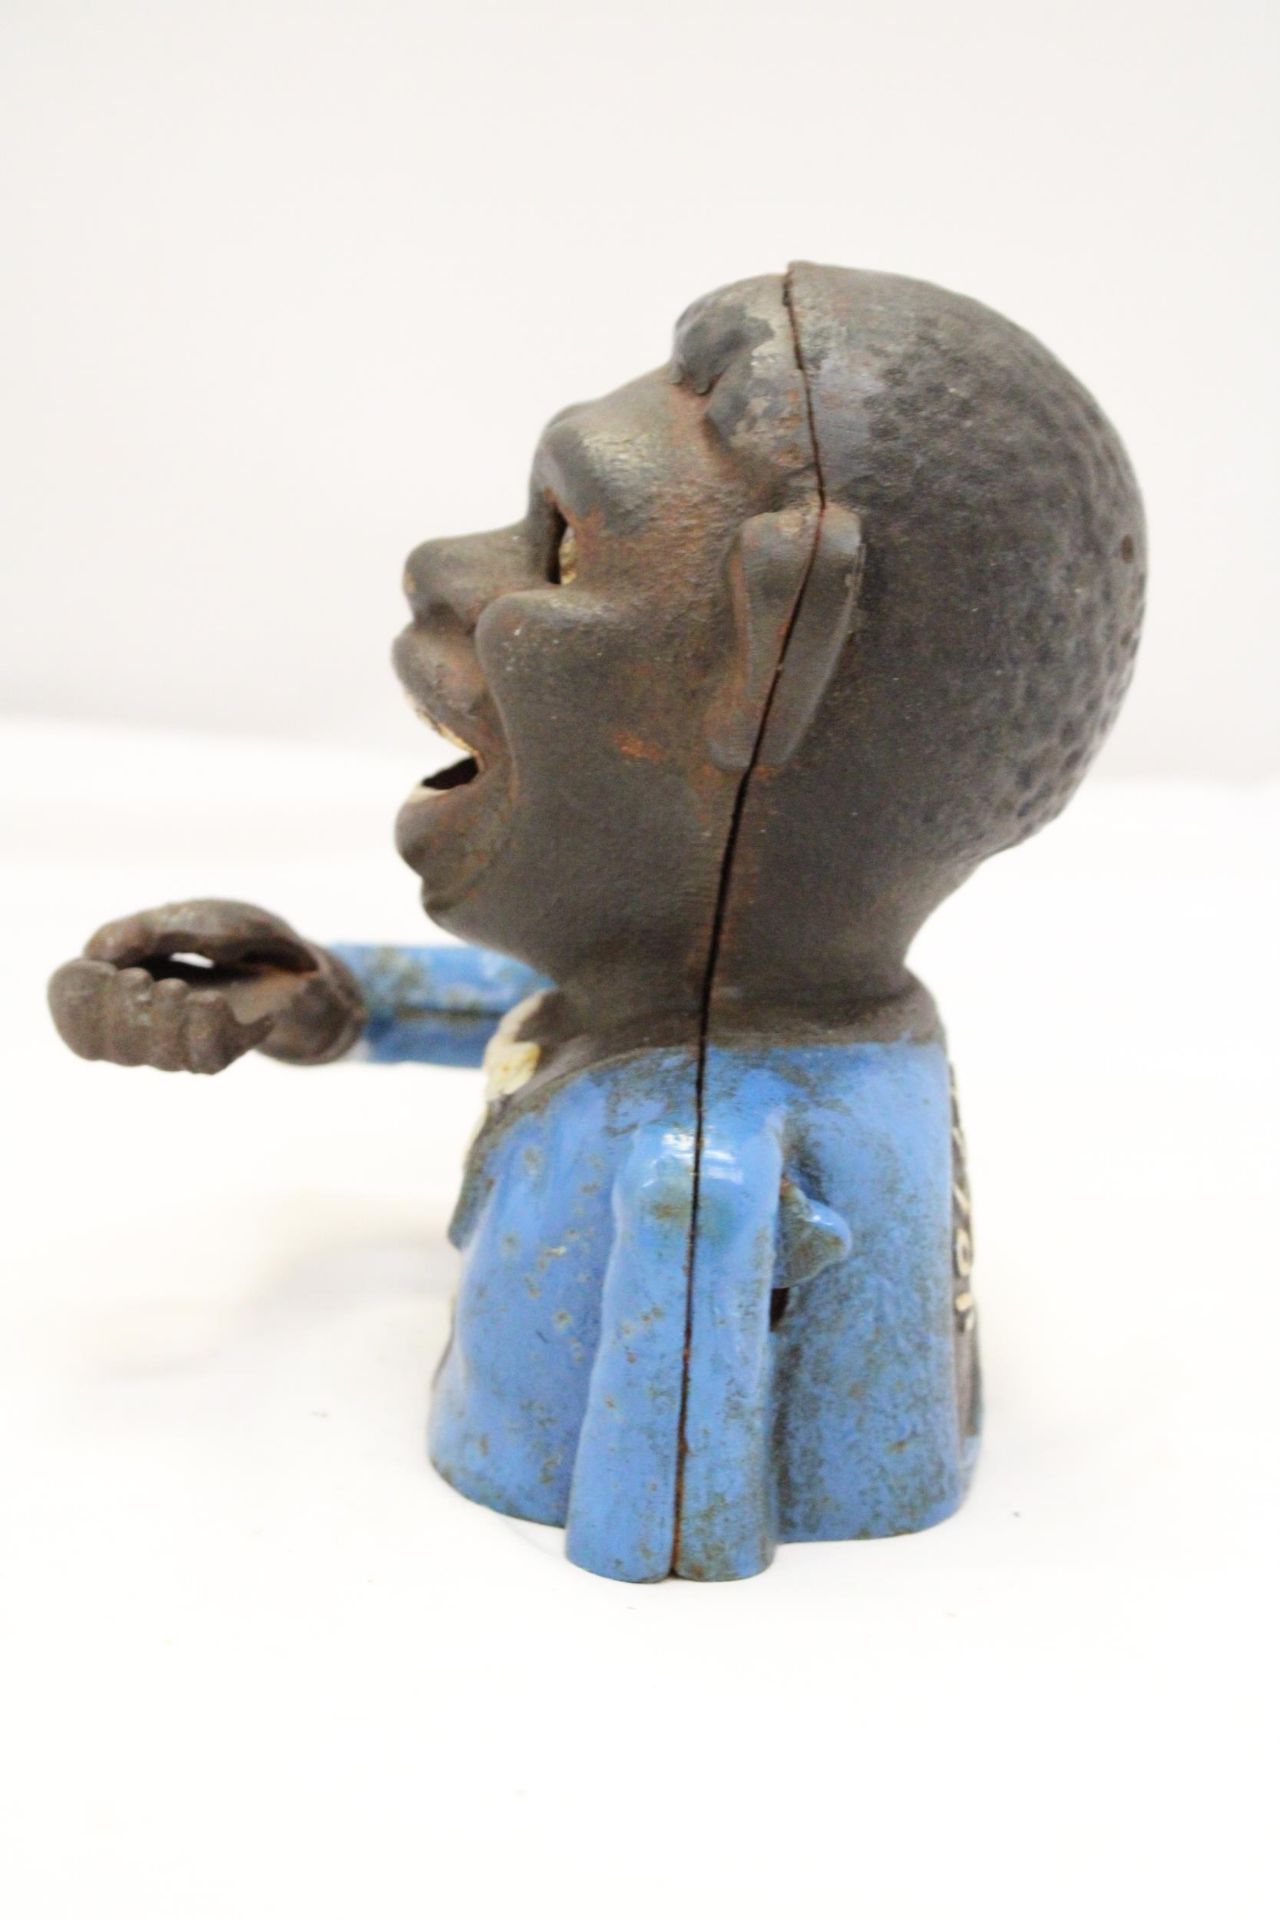 A VINTAGE CAST IRON AFRICAN AMERICAN MECHANICAL BANK - Image 3 of 6